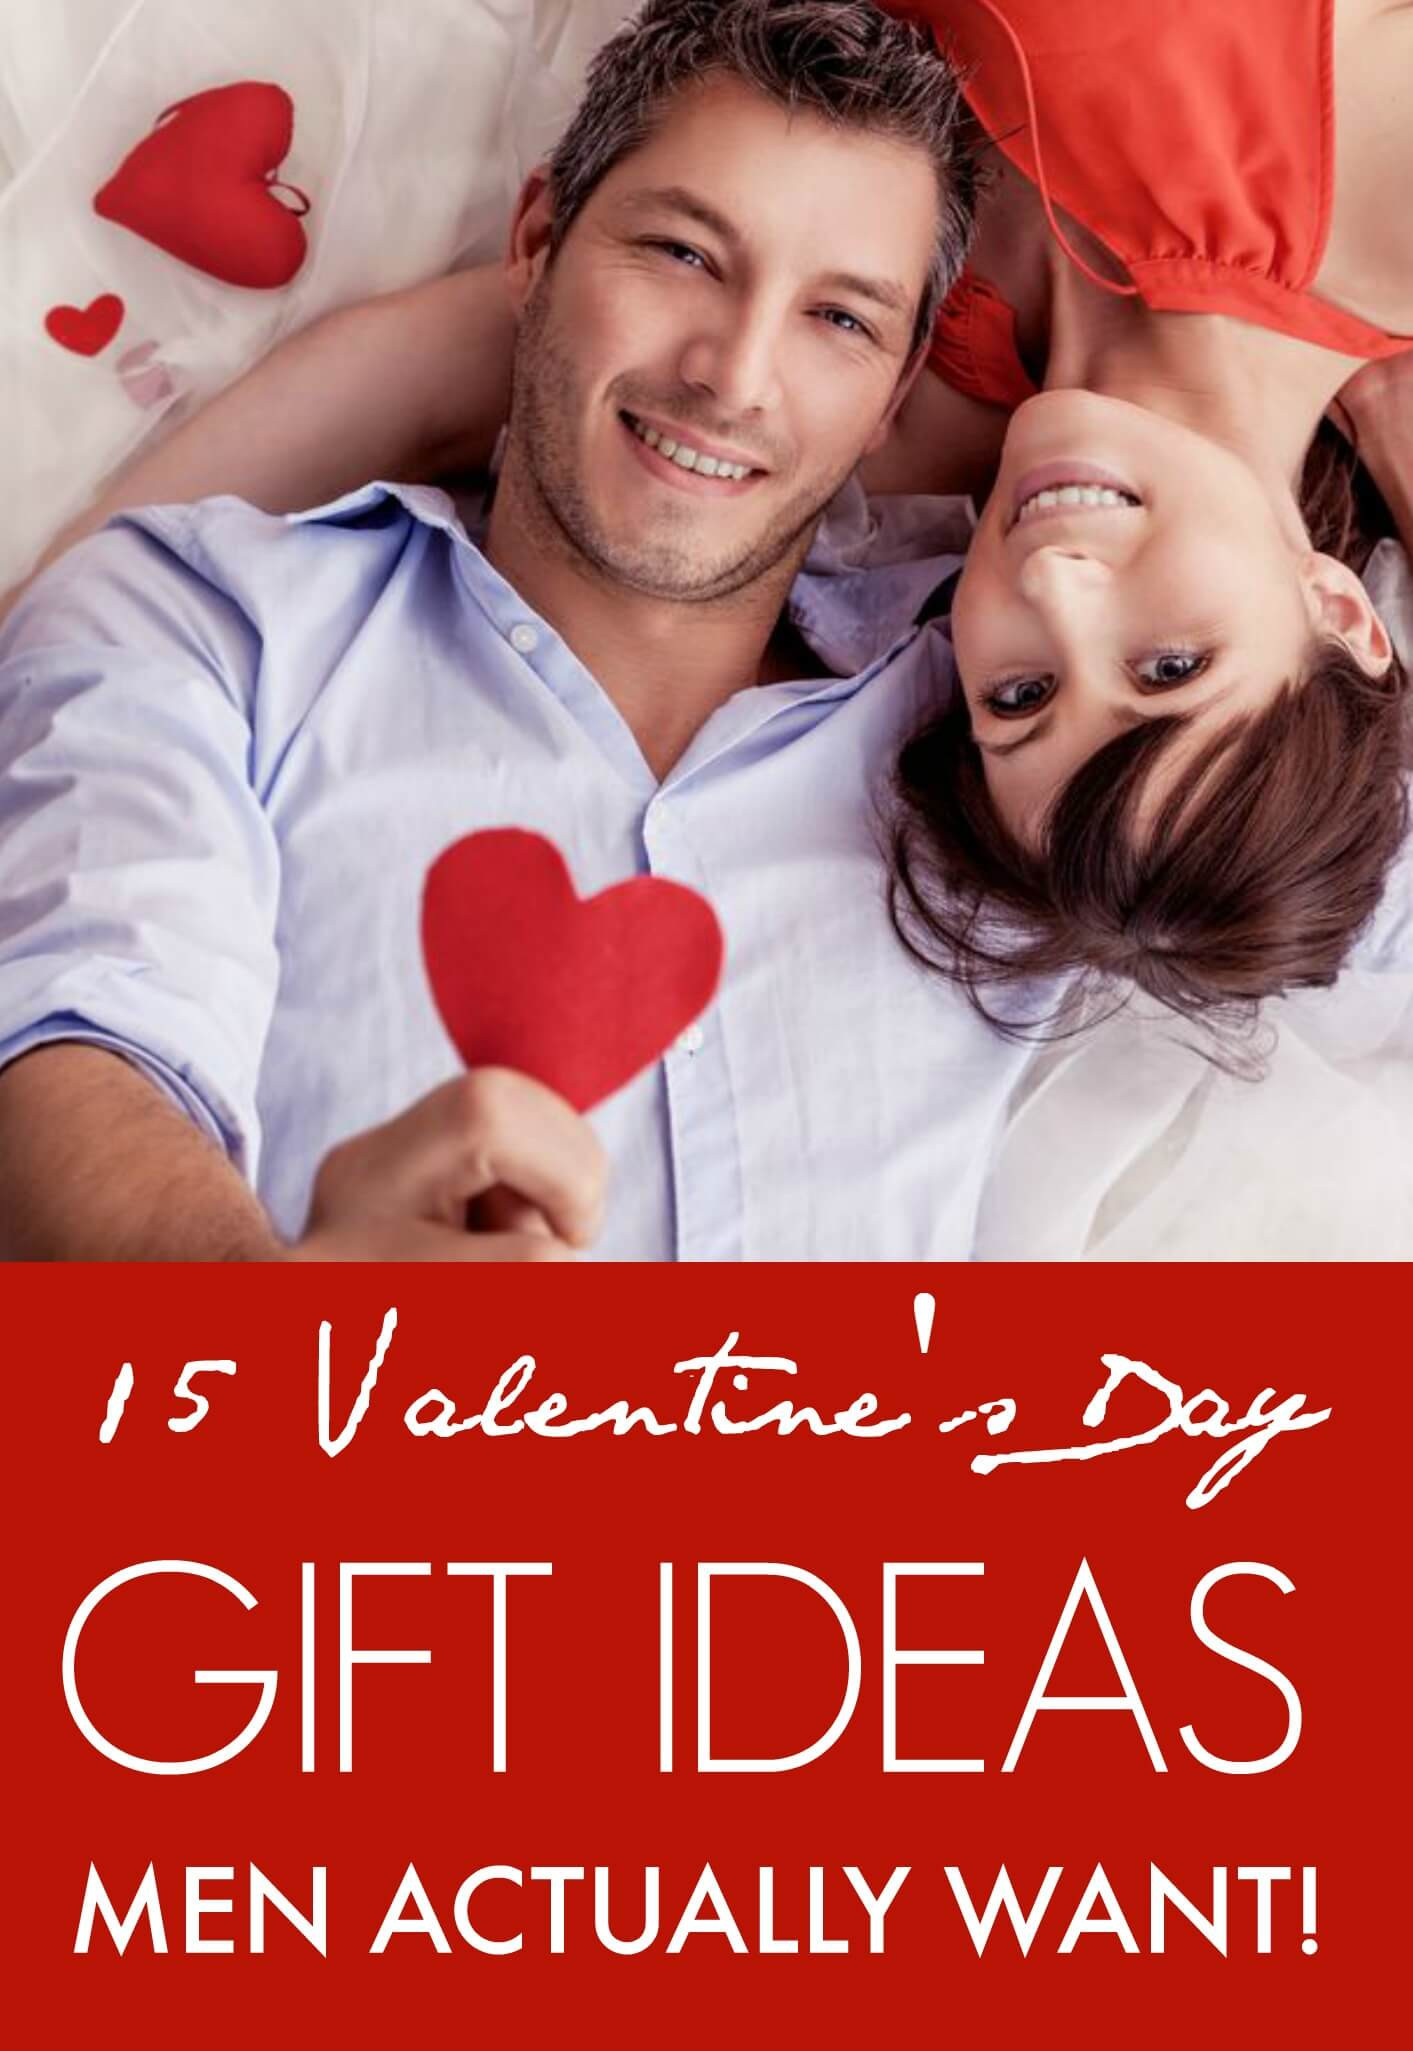 Valentines Gift Ideas For Guys
 15 Valentine’s Day Gift ideas Men Actually Want